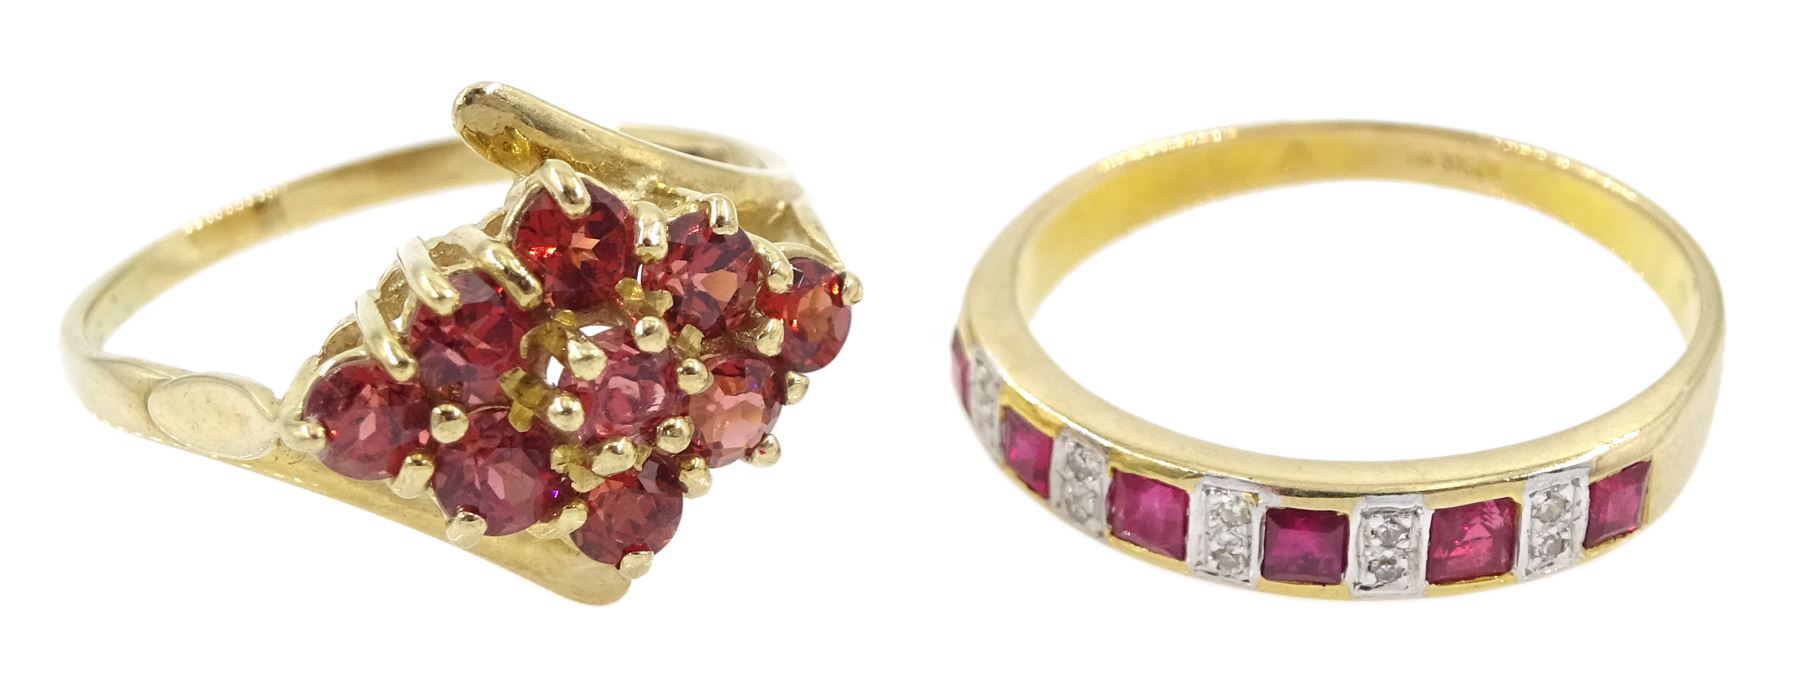 Gold Mozambique garnet ring and a gold ruby and diamond ring